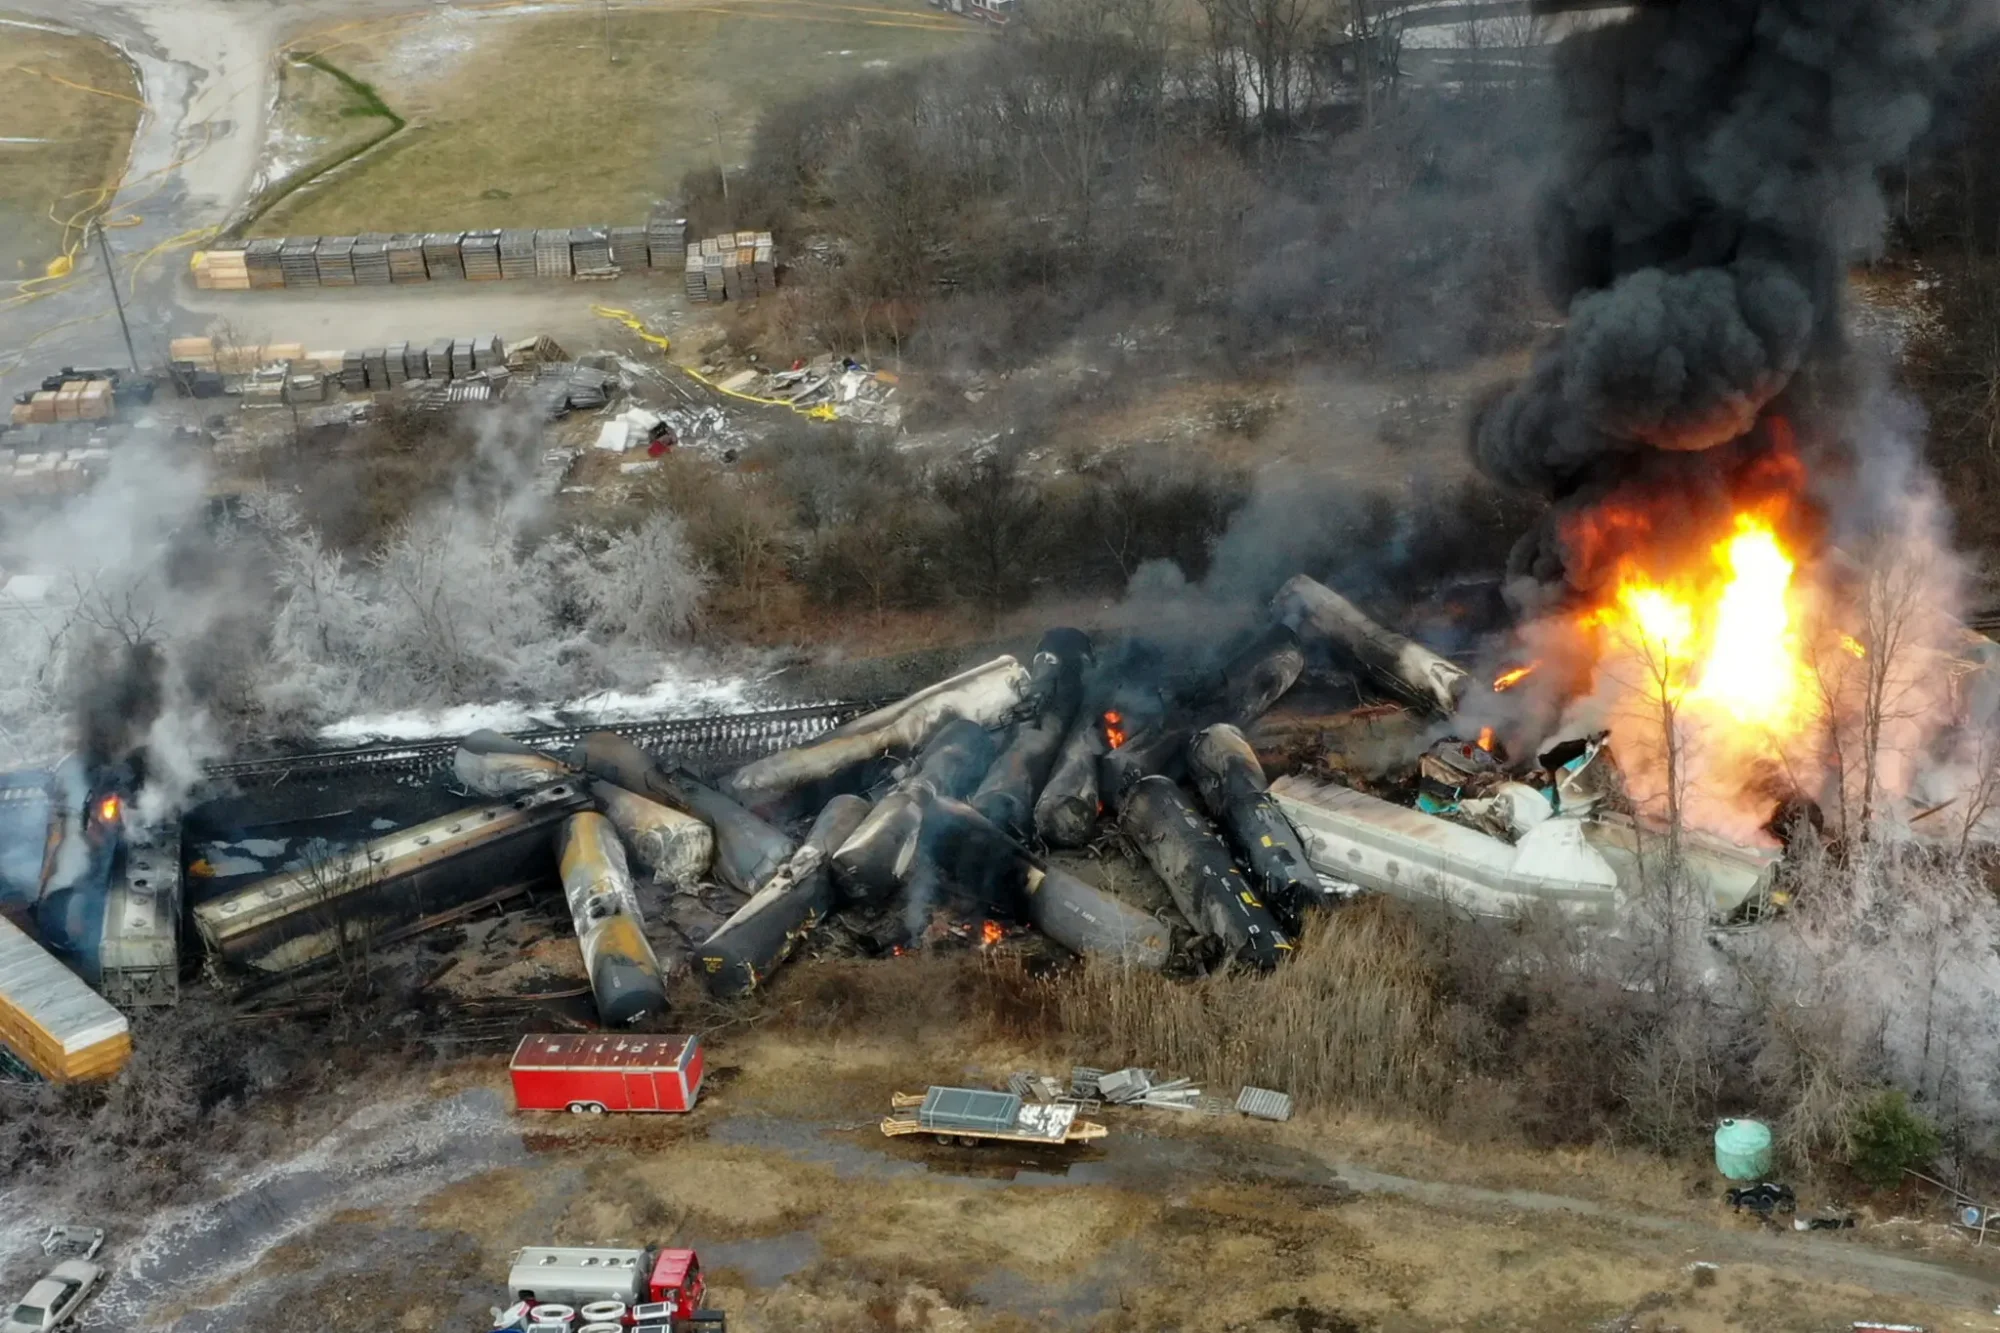 The derailment of a Norfolk Southern train in East Palestine, Ohio, in February. Workers and some rail experts say cost cutting has weakened safety at the railroad, once an industry leader.Credit…Gene J. Puskar/Associated Press